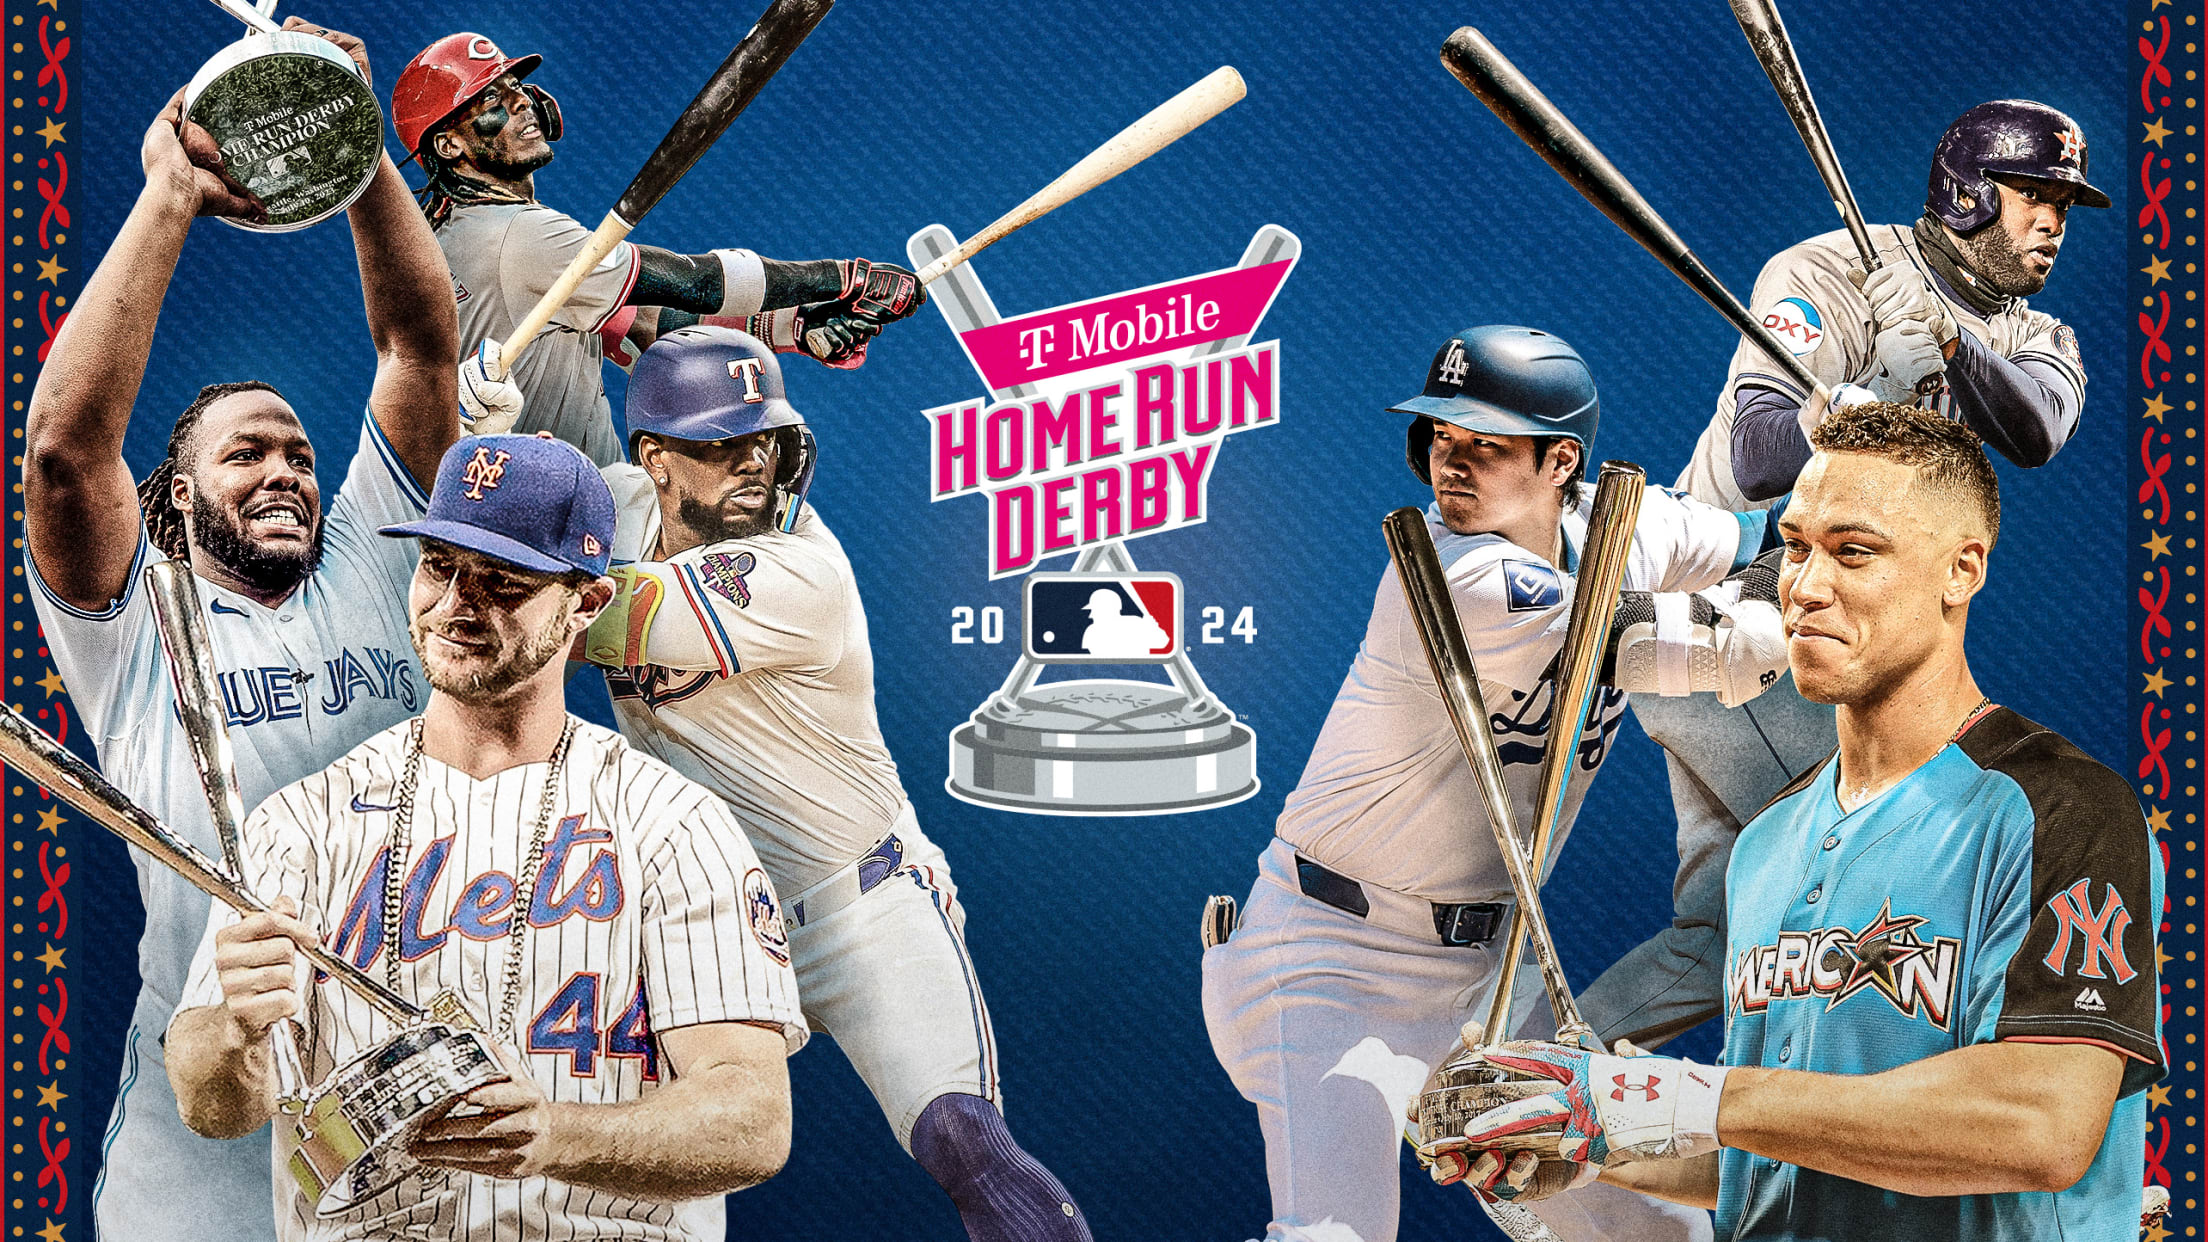 The sluggers we most want to see in the Home Run Derby